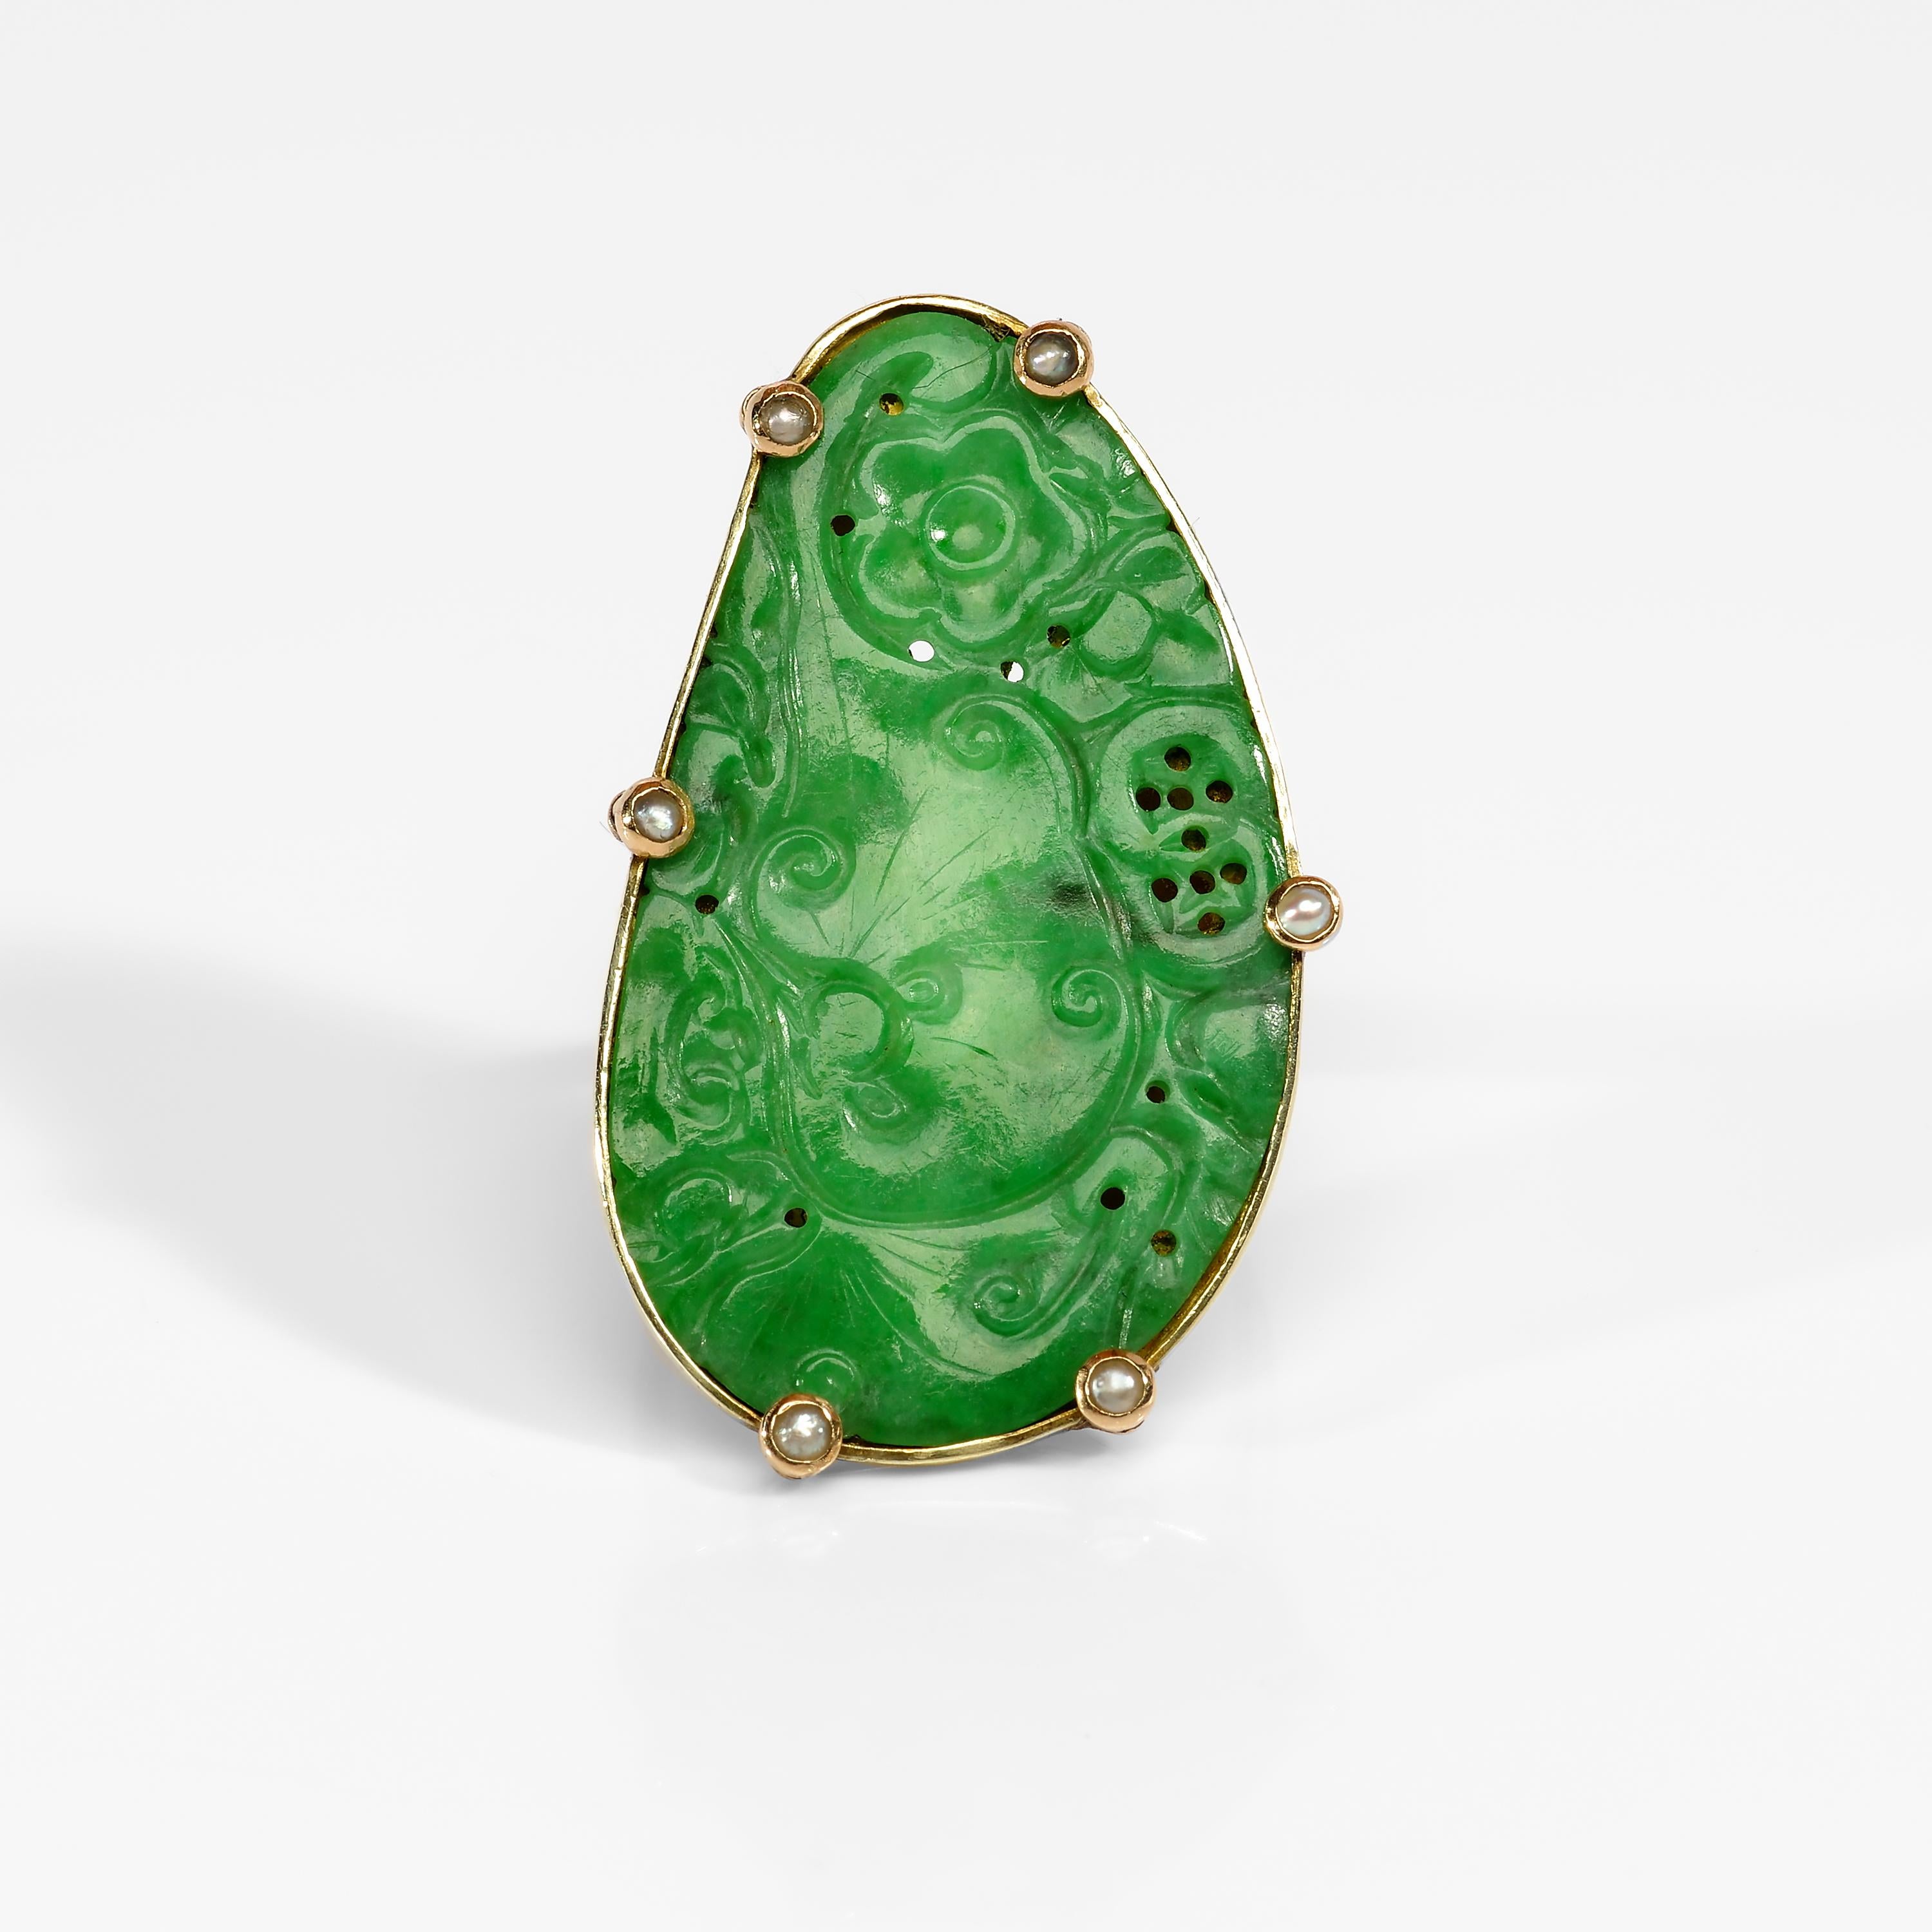 Depicting mushrooms, coins, and a hibiscus blossom, this spectacularly rich, evenly-toned natural jadeite jade has been meticulously carved, pierced, and thus imbued with meaning: longevity, prosperity, and splendor. The large jade carving measures